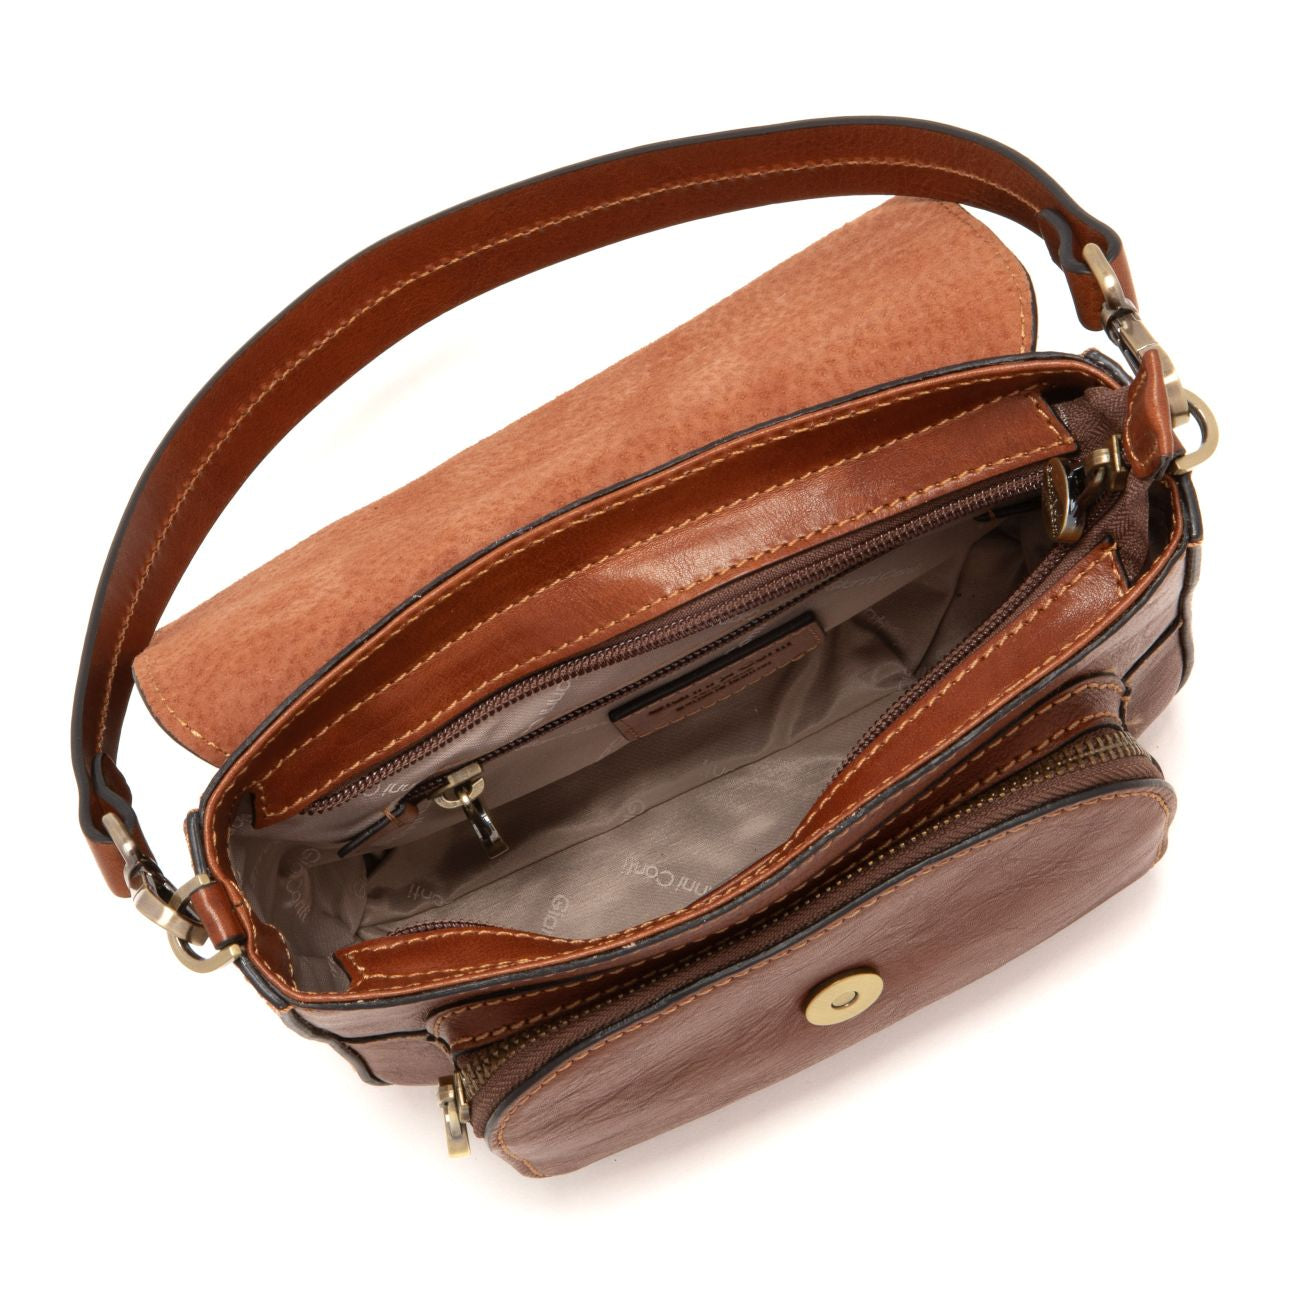 CLEO Cognac Leather Shoulder Bag by Gianni Conti